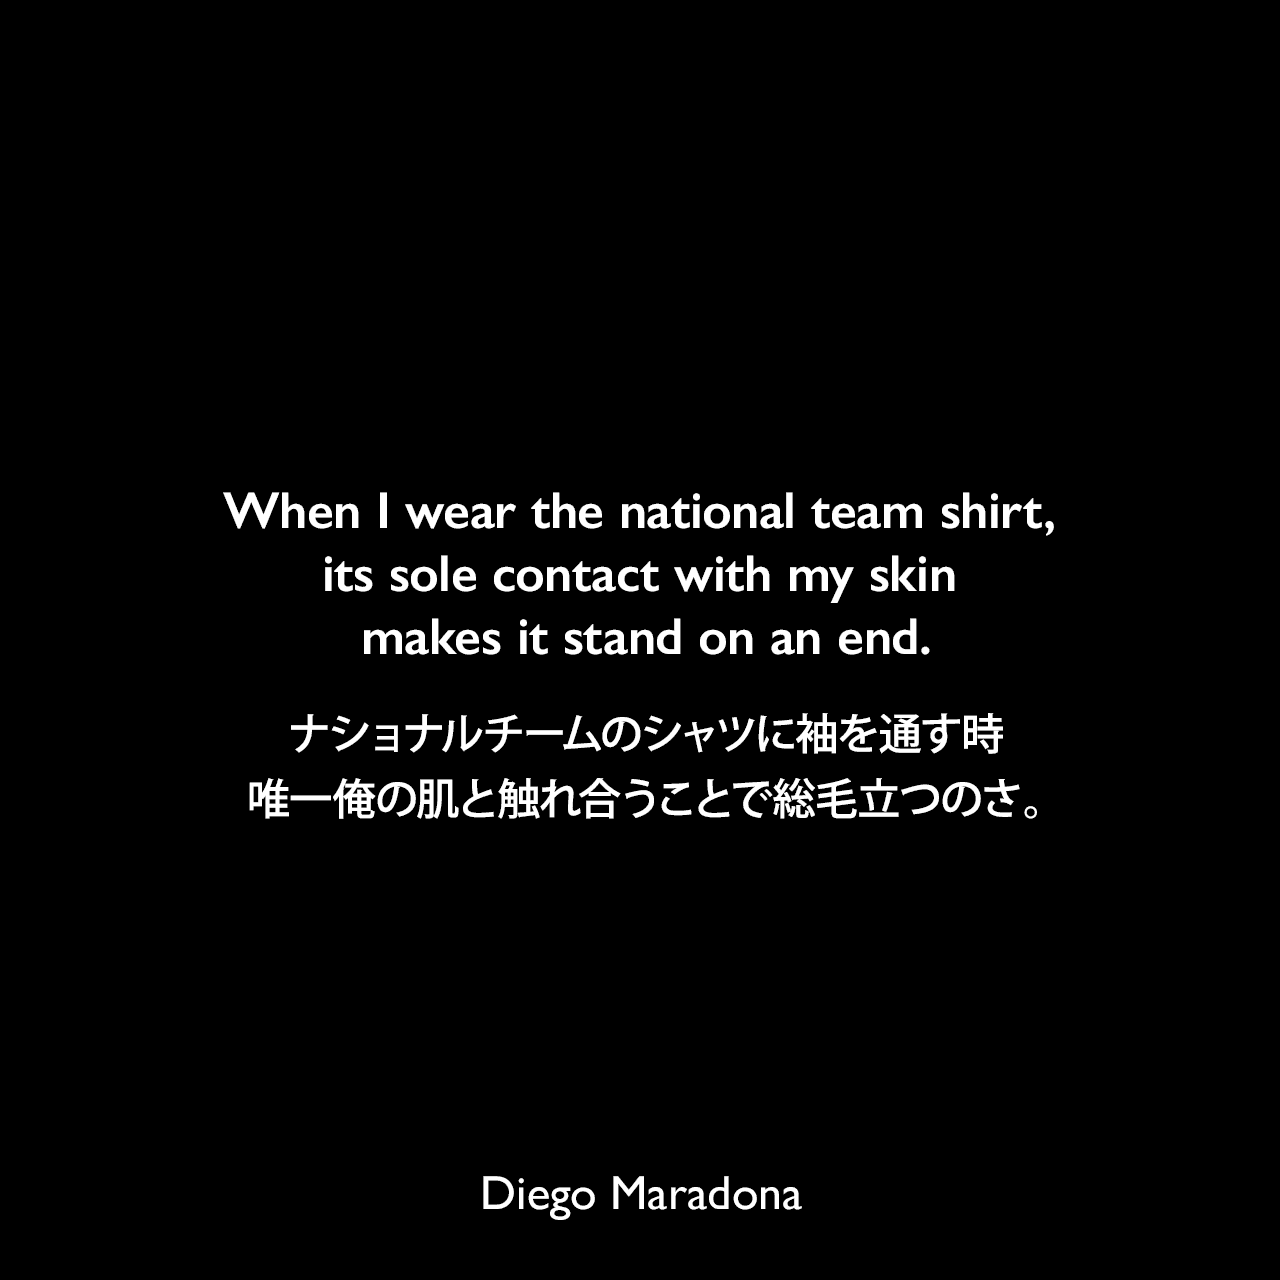 When I wear the national team shirt, its sole contact with my skin makes it stand on an end.ナショナルチームのシャツに袖を通す時、唯一俺の肌と触れ合うことで総毛立つのさ。Diego Maradona